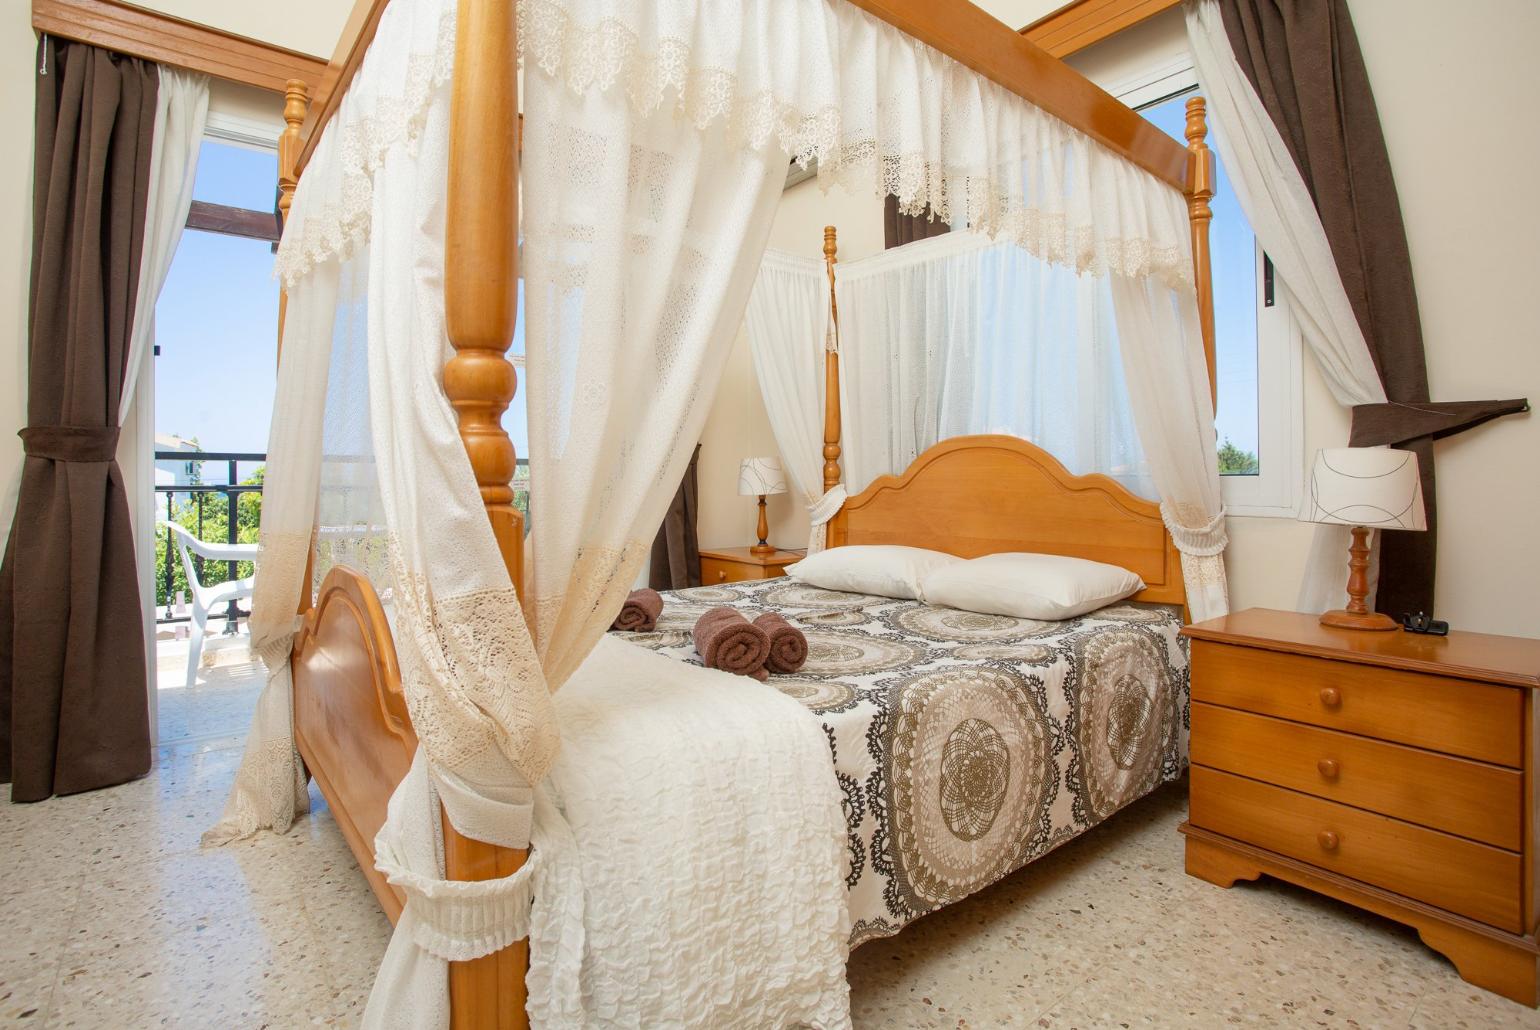 Double bedroom with en suite bathroom, A/C and balcony access with sea views